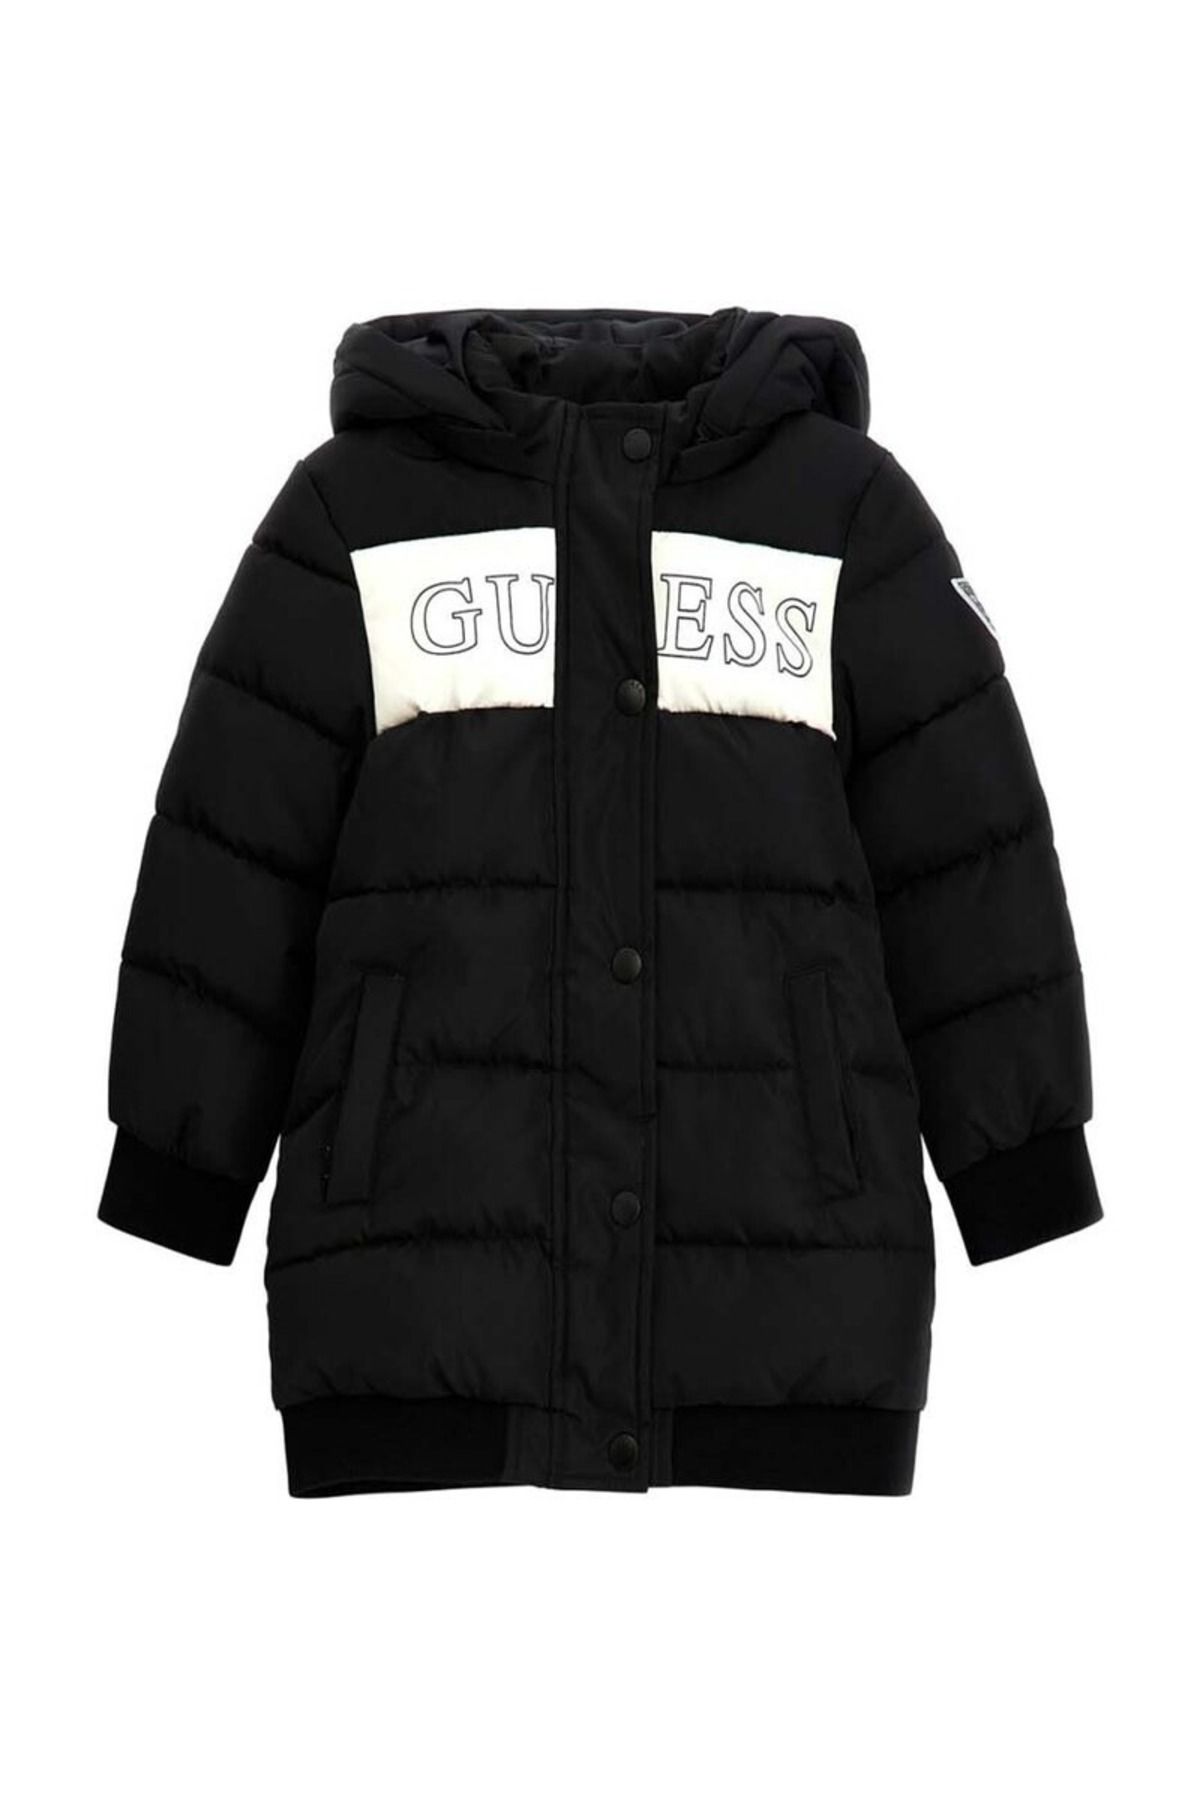 Guess Hooded ls Padded Jac Mont